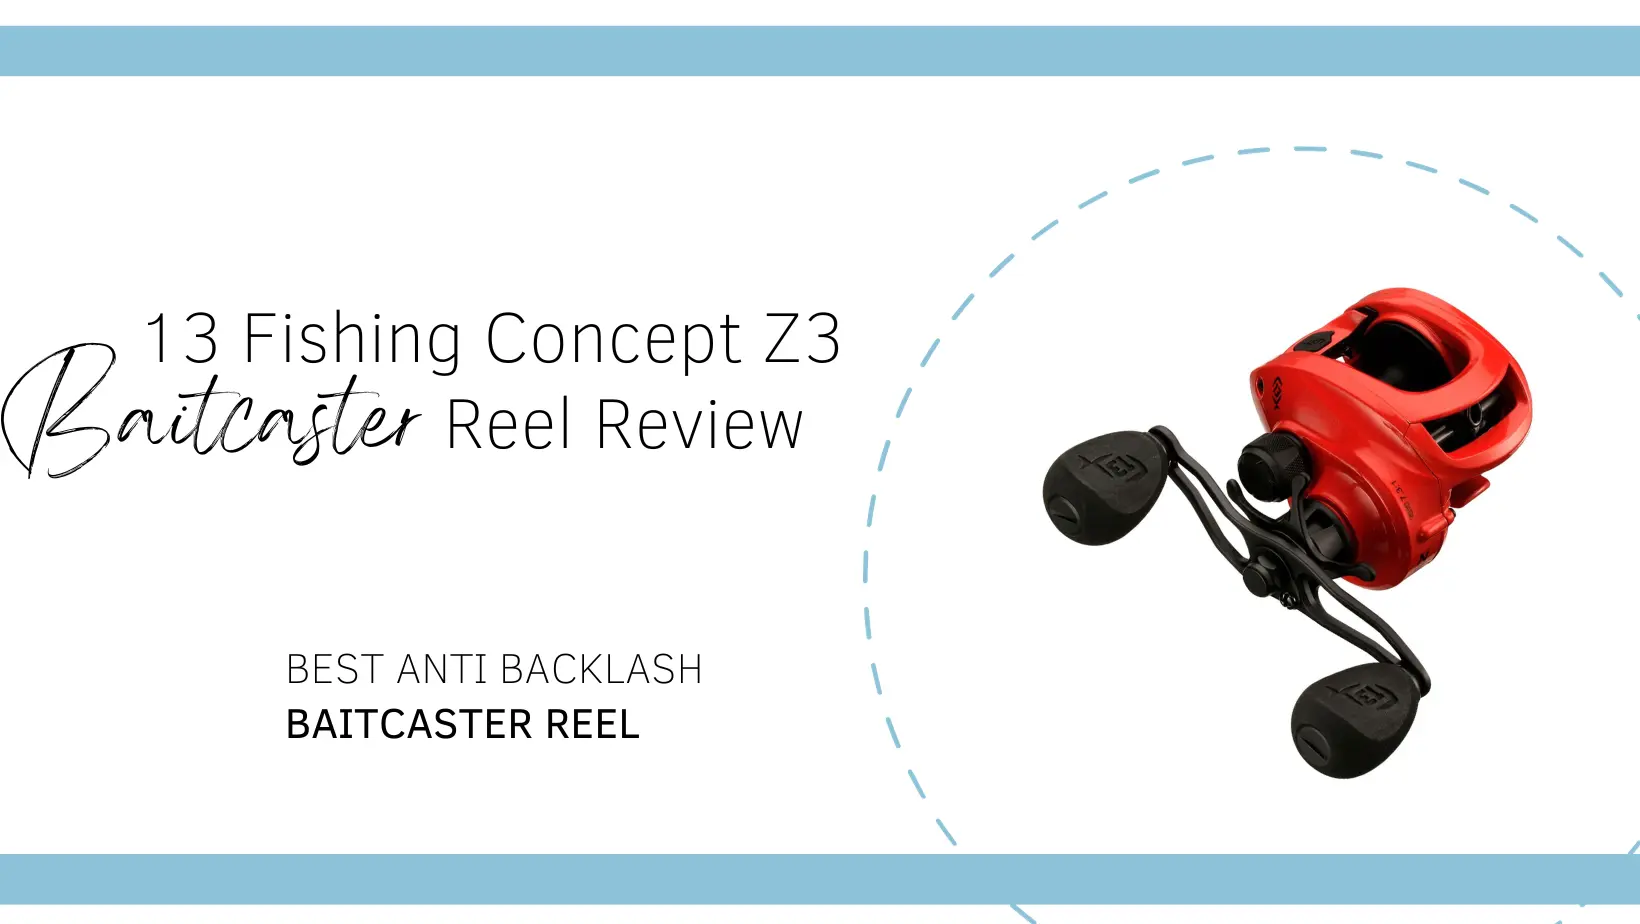 13 Fishing Concept Z3 Reel Review